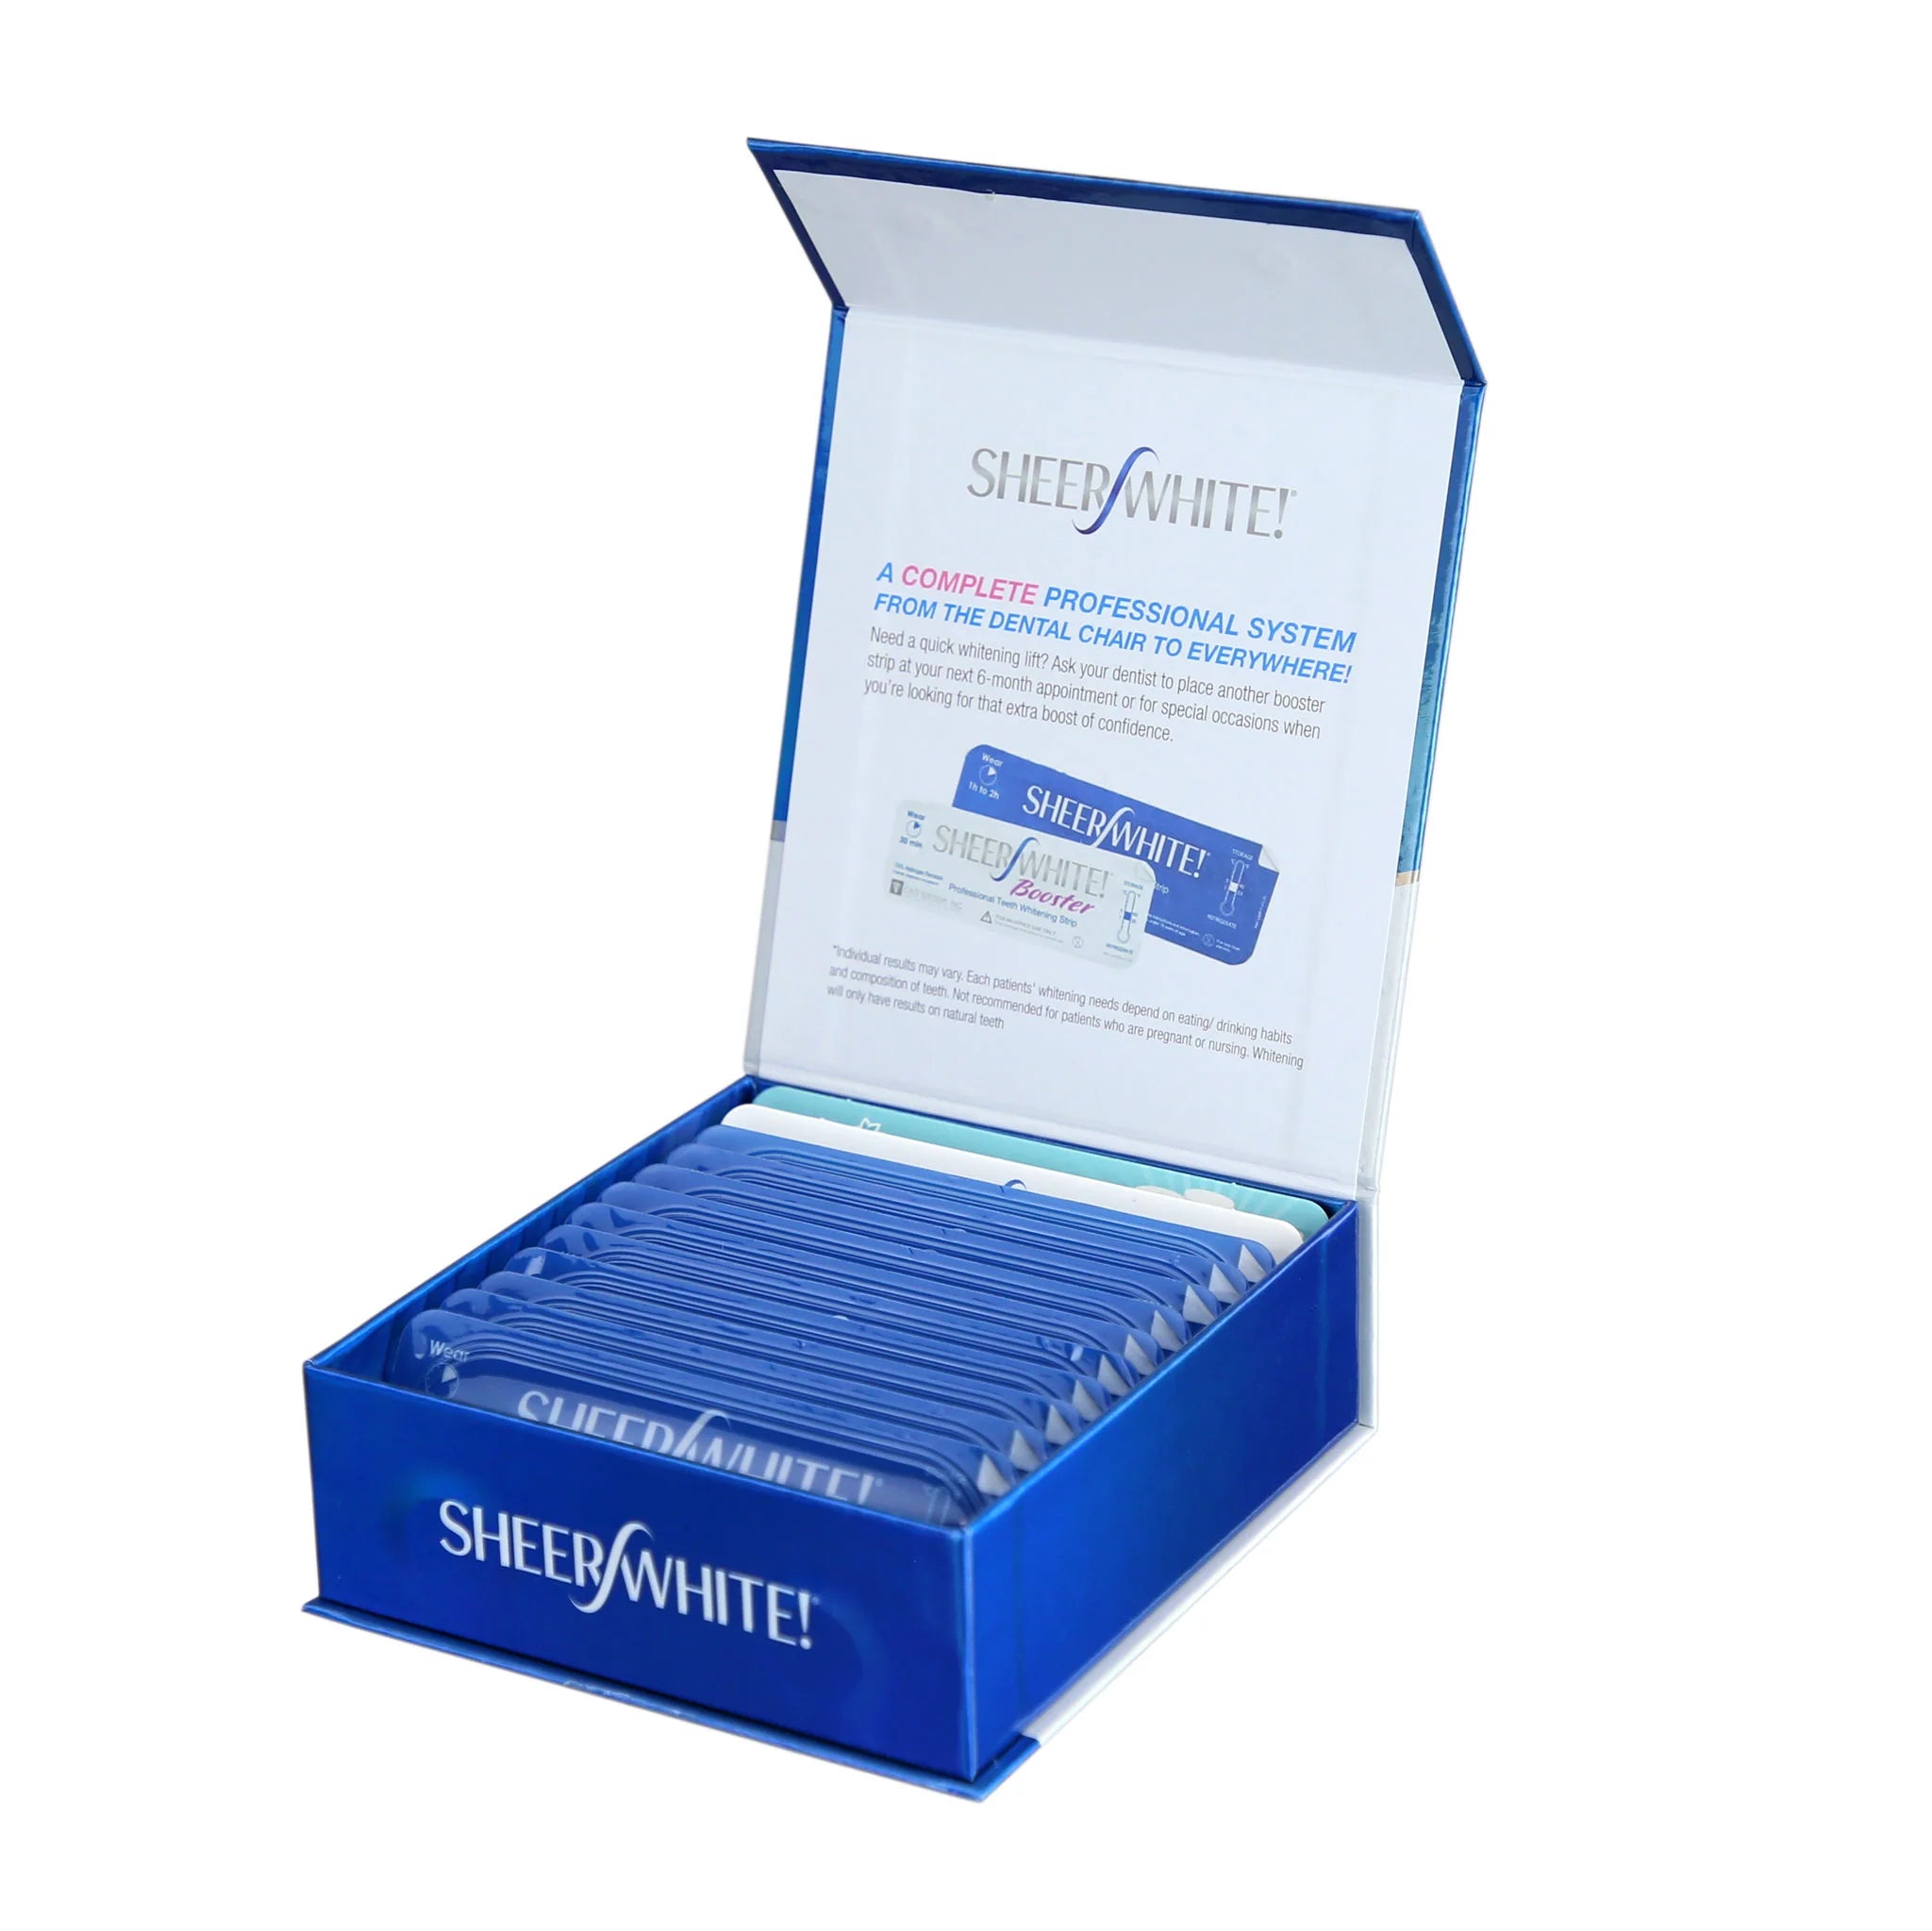 Professional Exclusive Crest 3DWhitestrips Supreme with LED Light